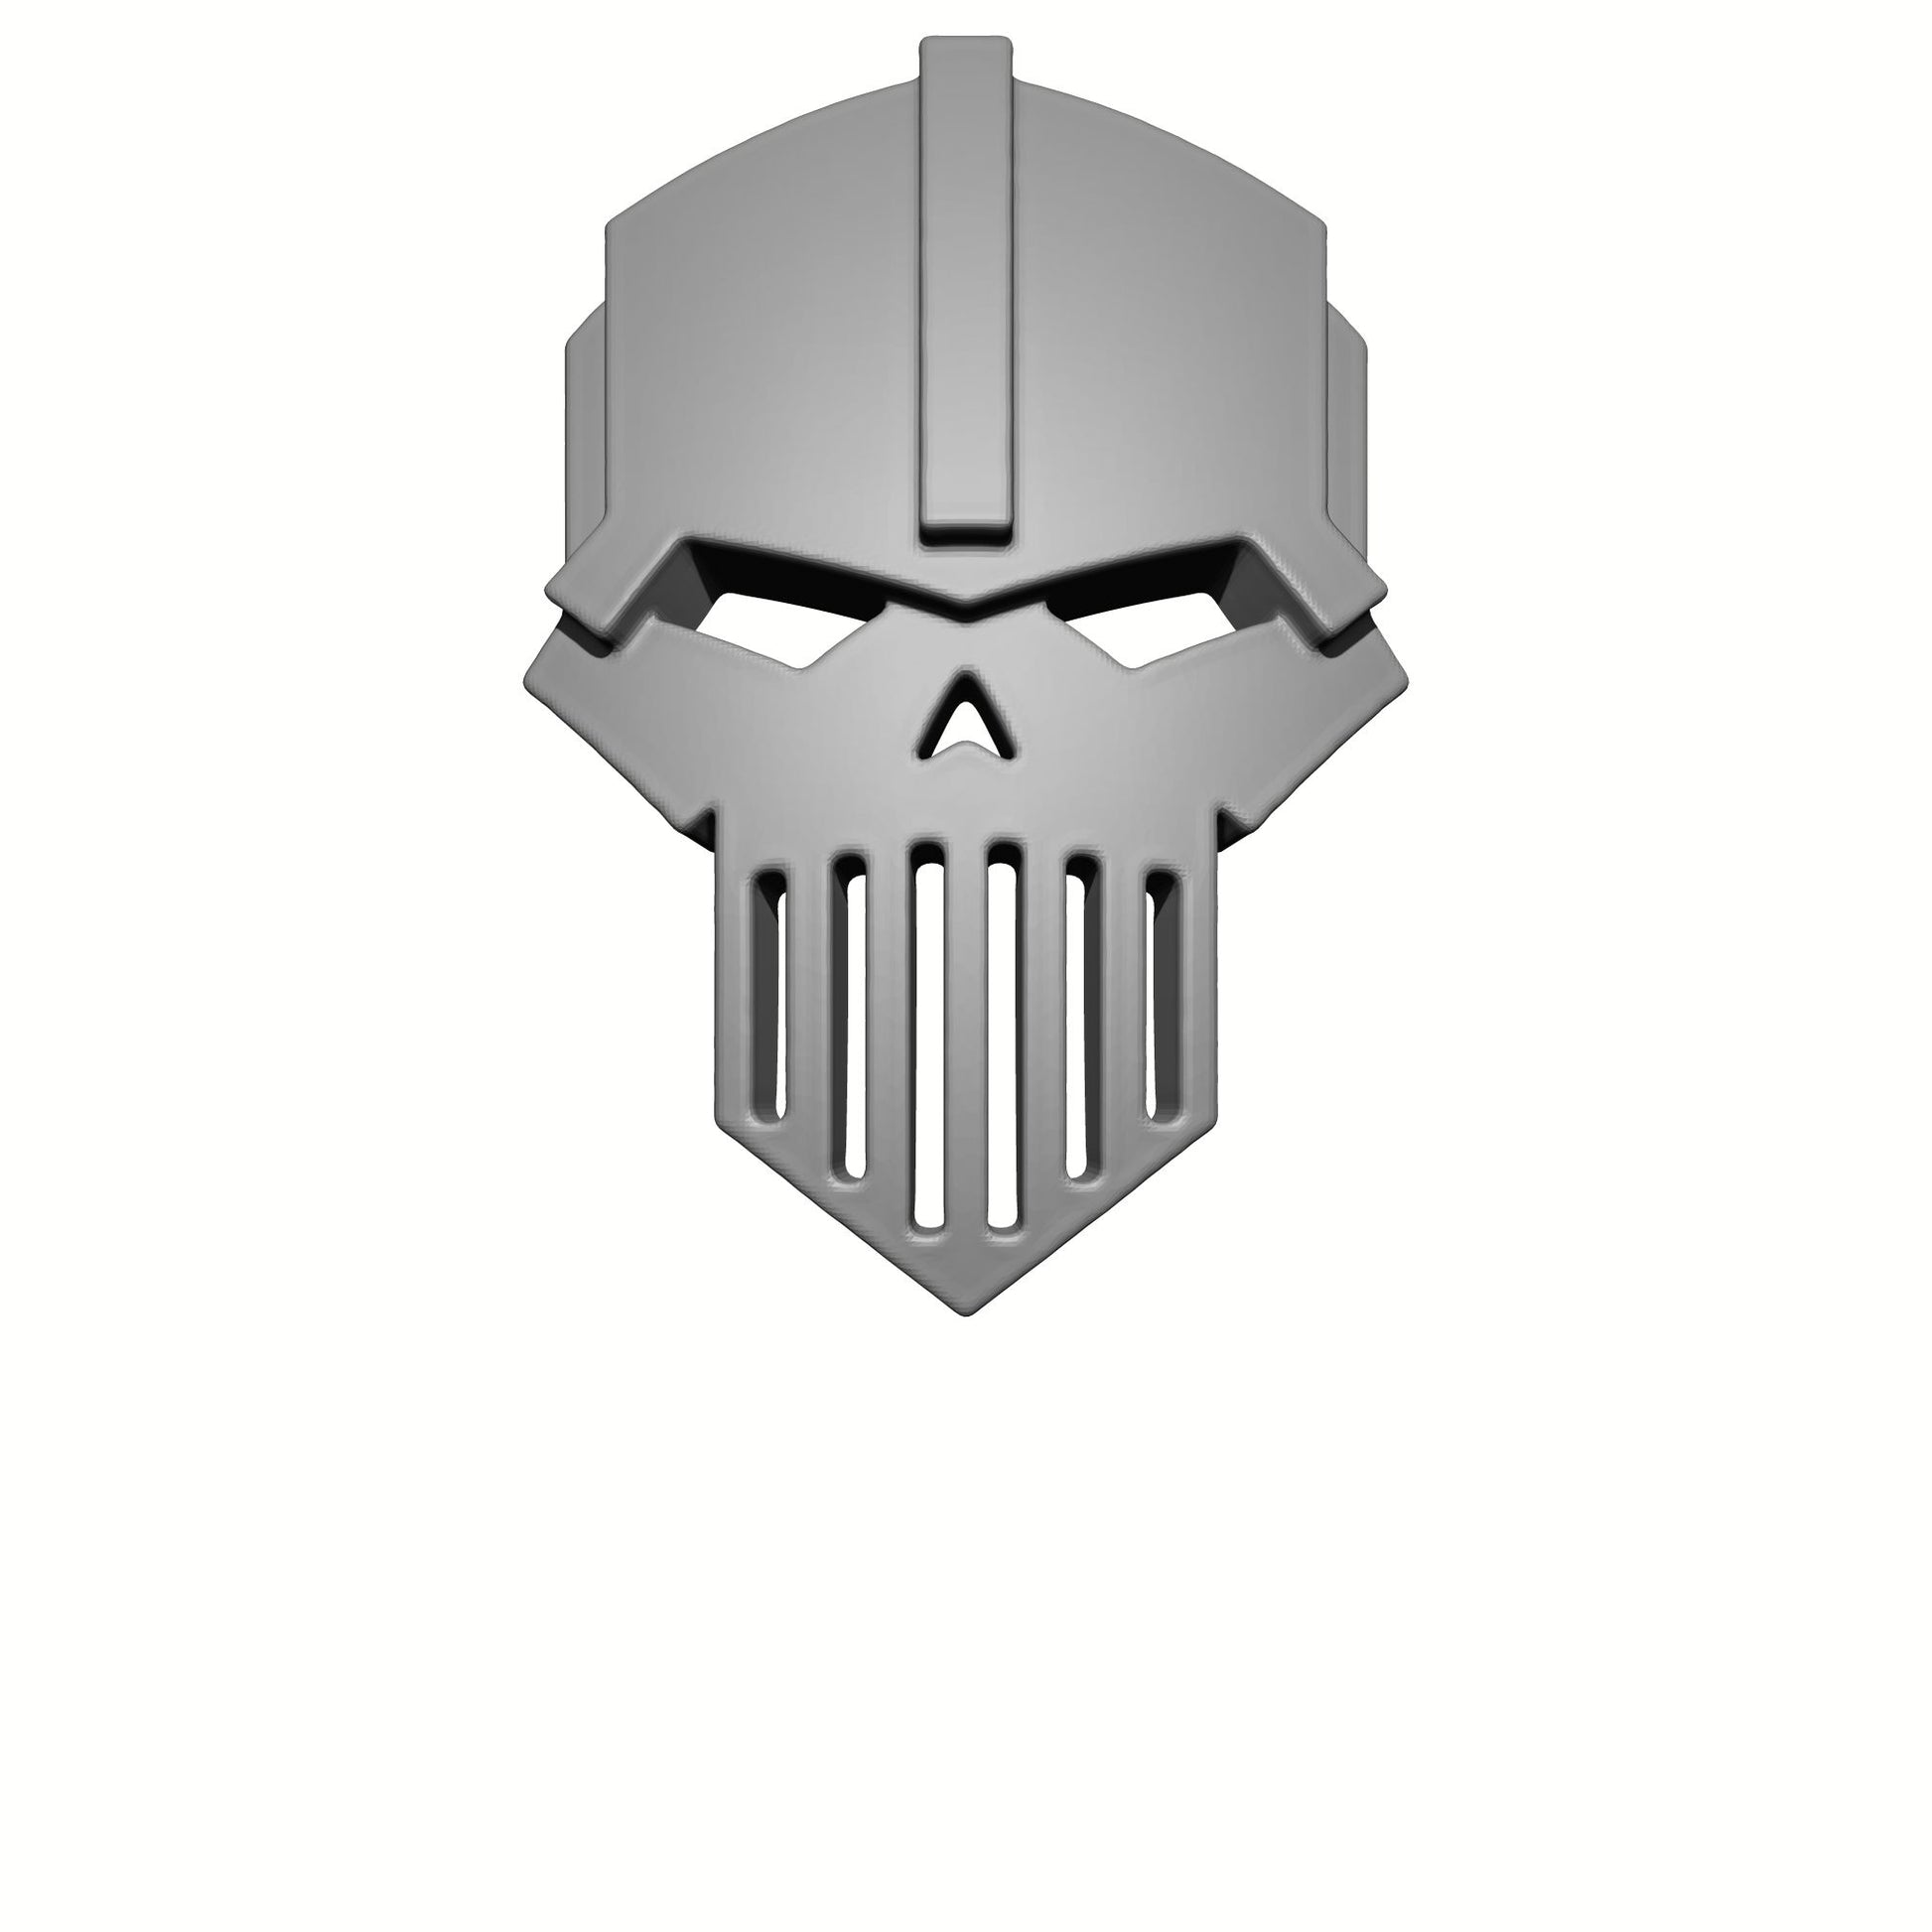 Iron Warriors Chapter Pauldron Insignia this 3D Shoulder Pad Decal is designed to fit McFarlane Toys 1/12 Scale Space Marine